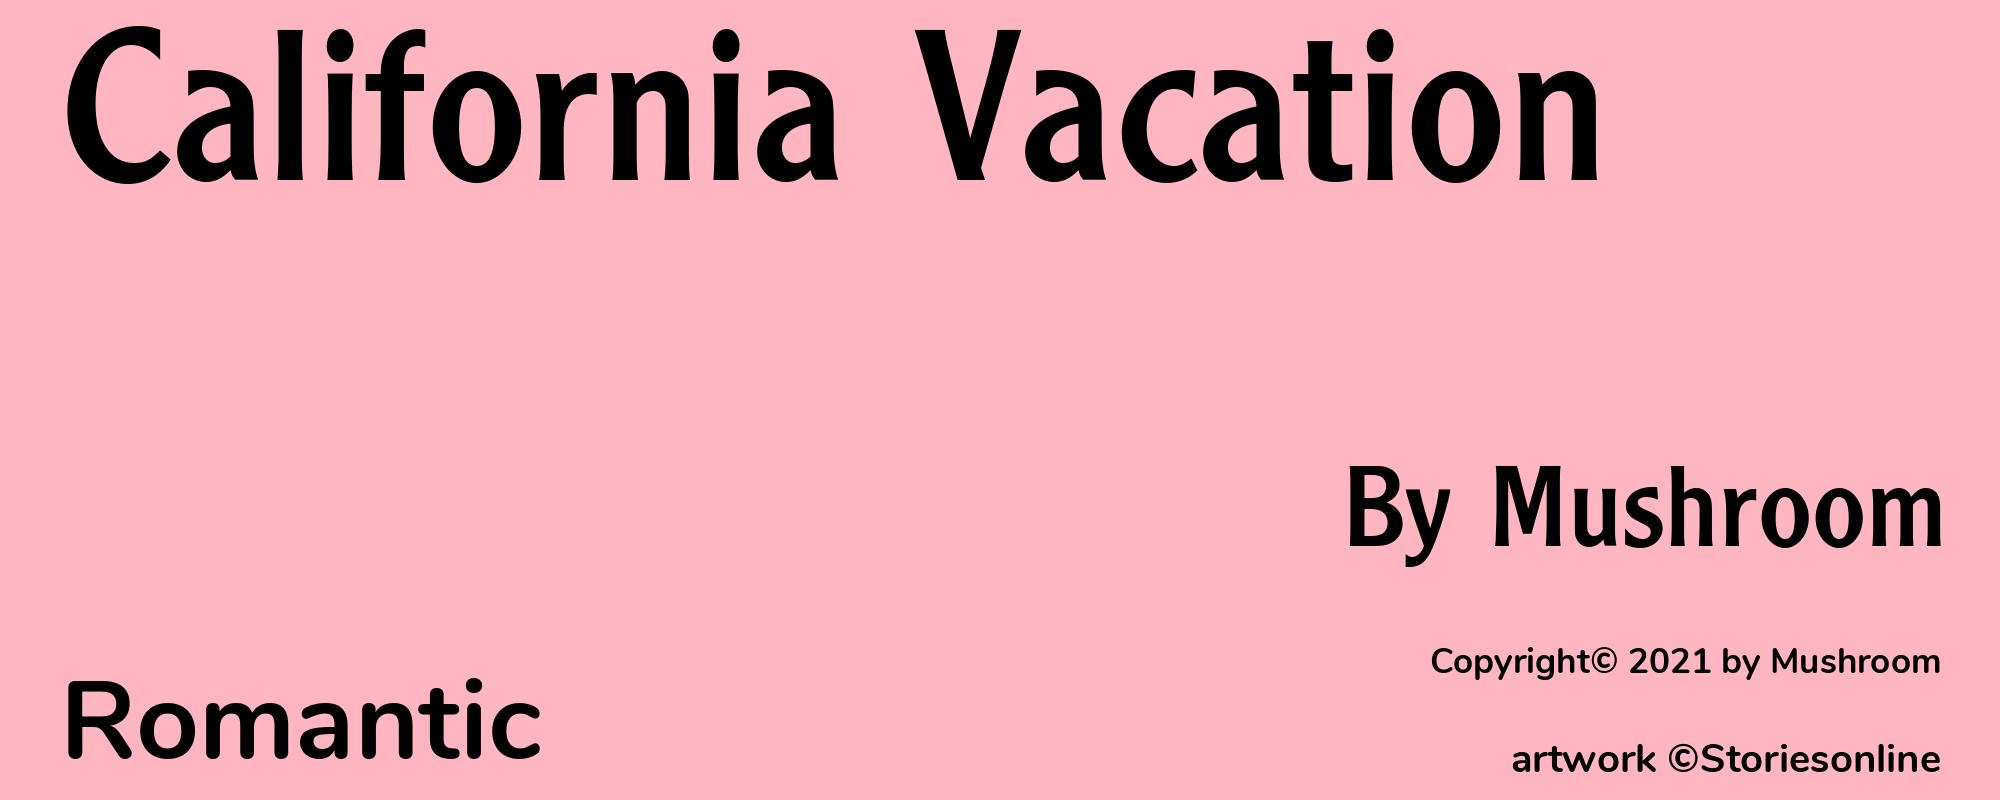 California Vacation - Cover